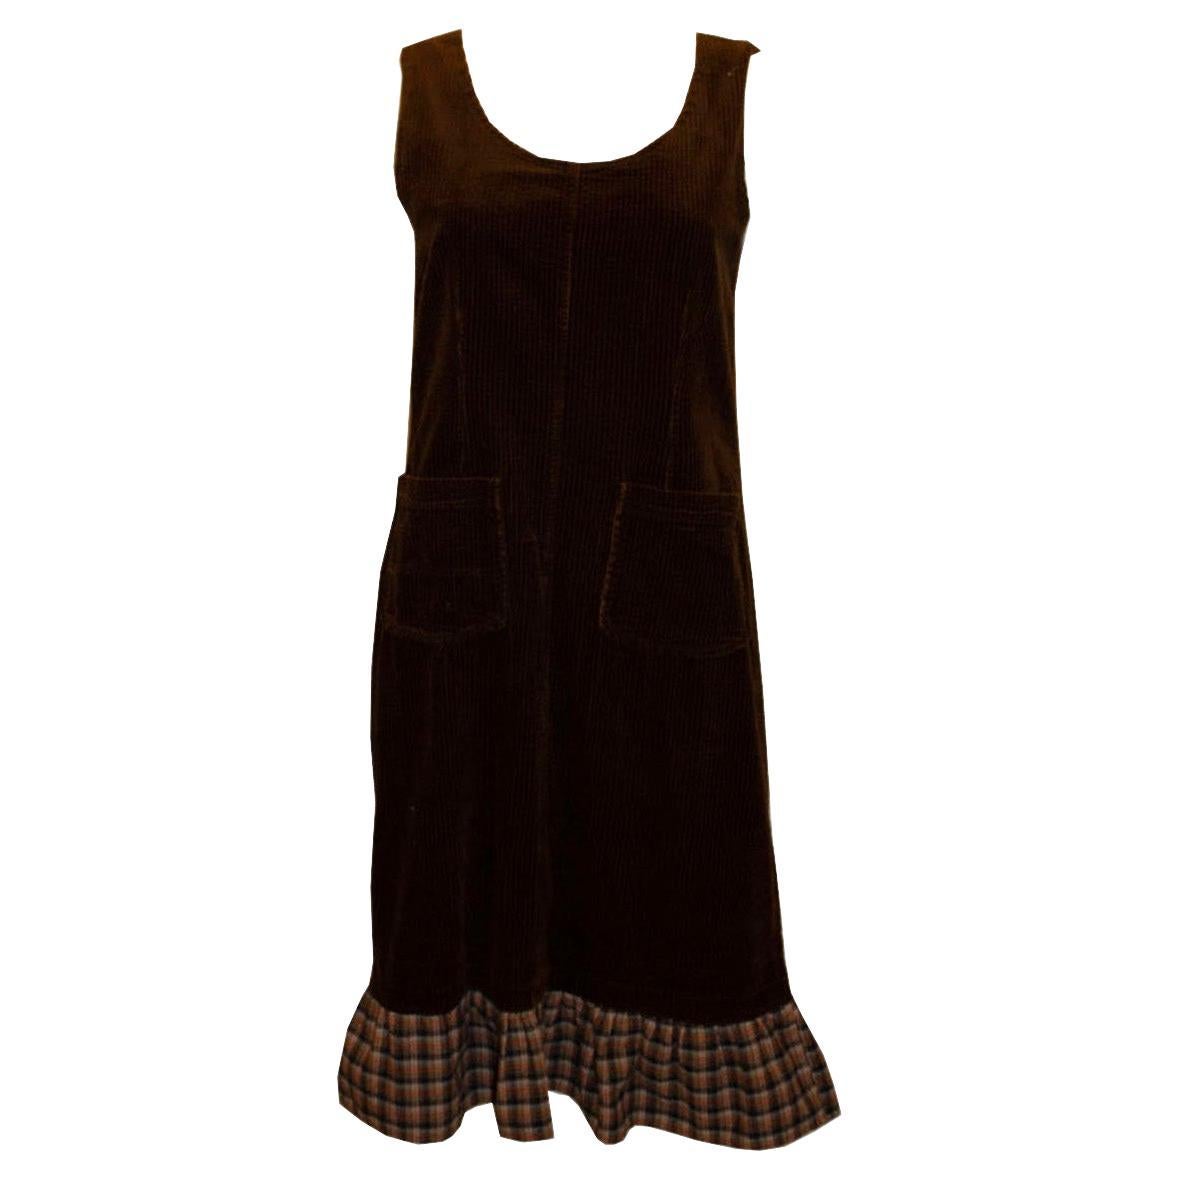 Vintage Monsoon Pinafore Dress with Check Frill For Sale